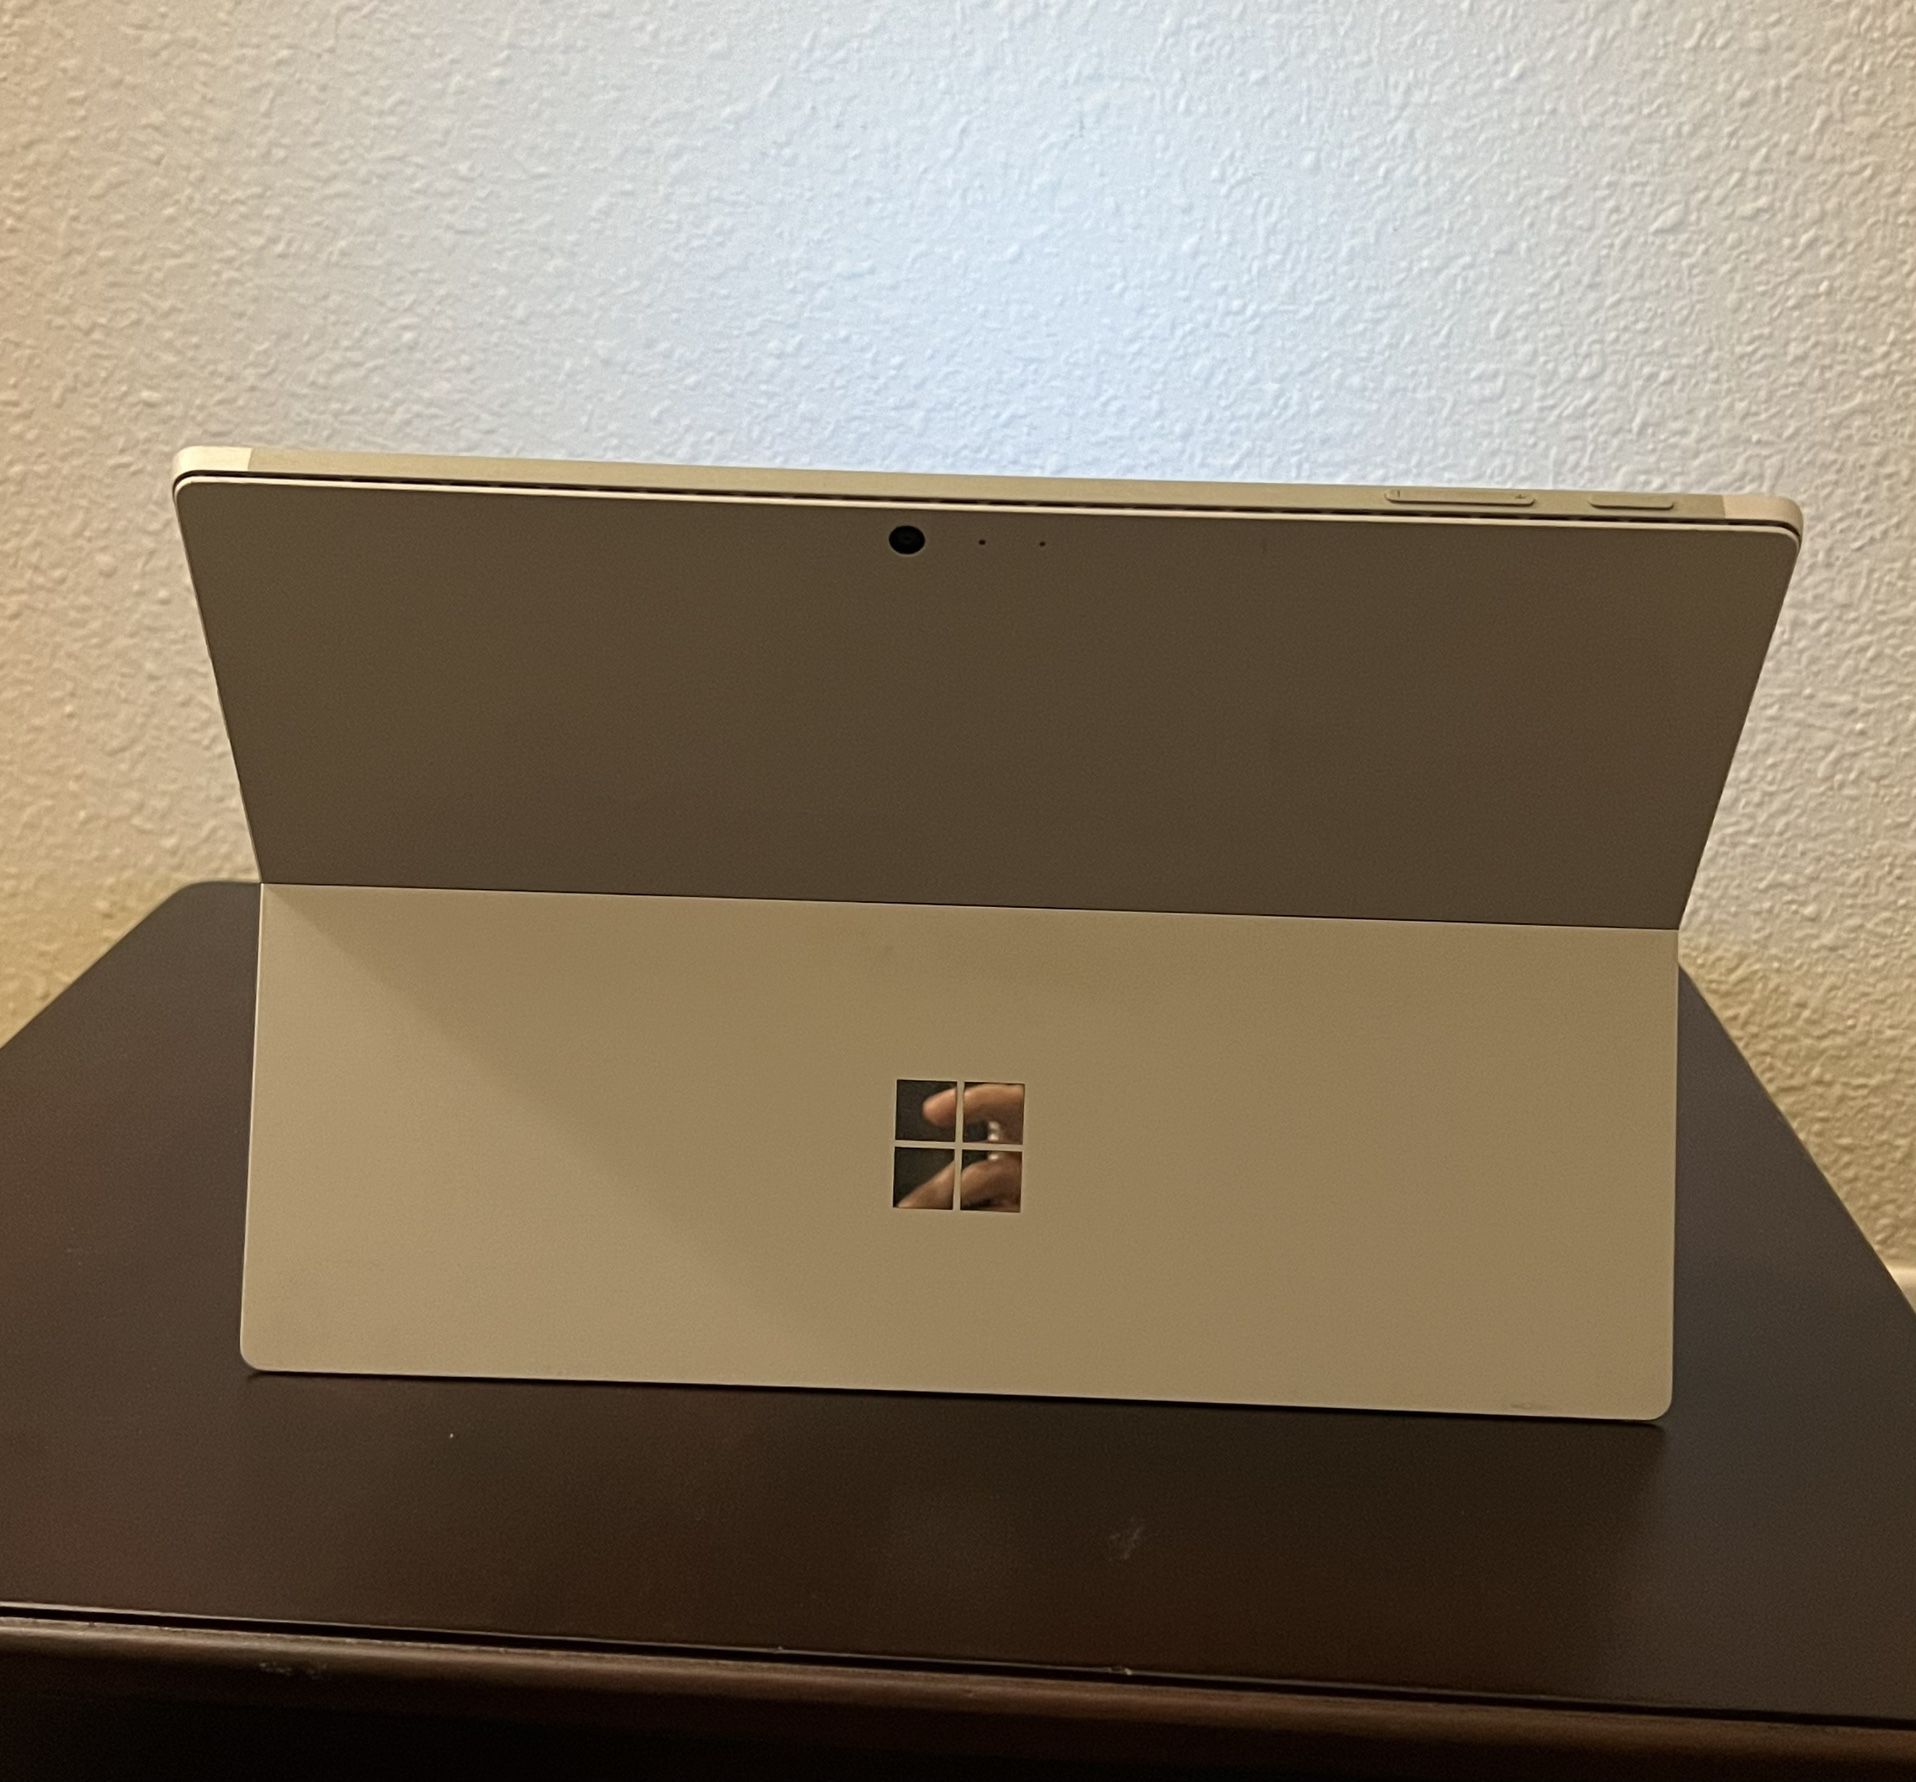 2in1 Microsoft Surface Laptop, TouchScreen, Core i5 with 2.5GHz Speed, 256 SSD